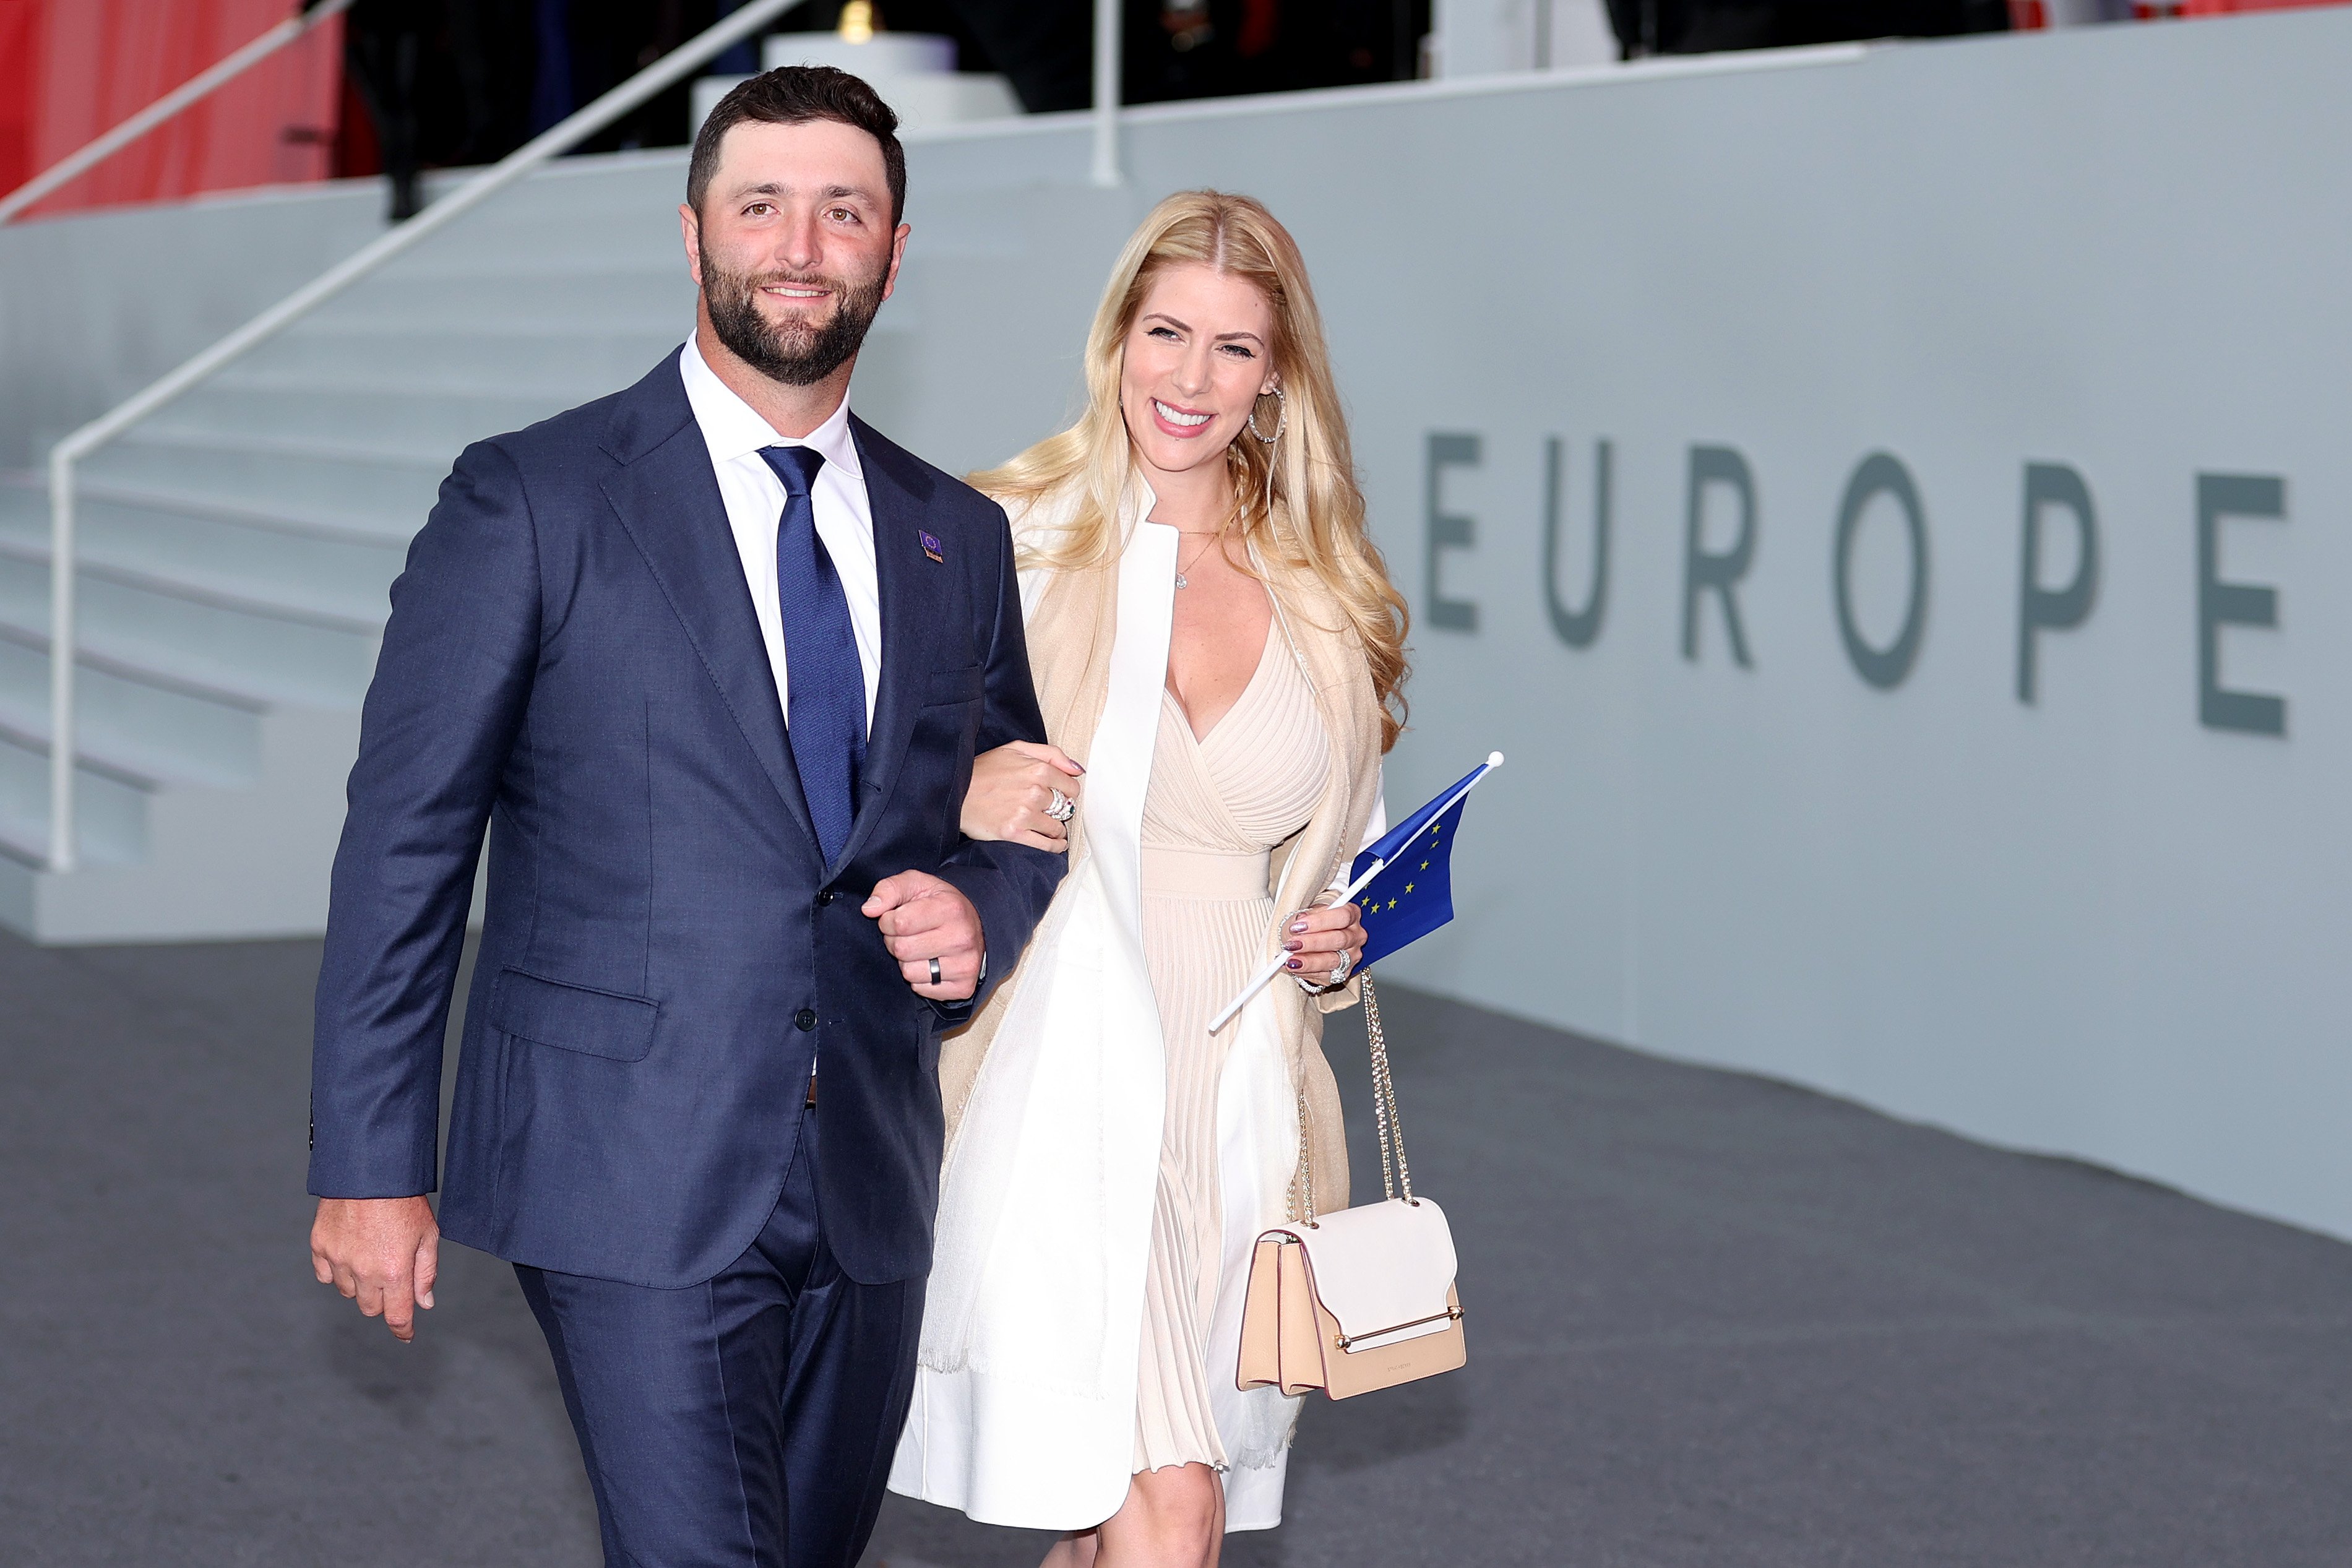 Jon Rahm of Spain and team Europe and wife Kelley Cahill attend the opening ceremony for the 43rd Ryder Cup